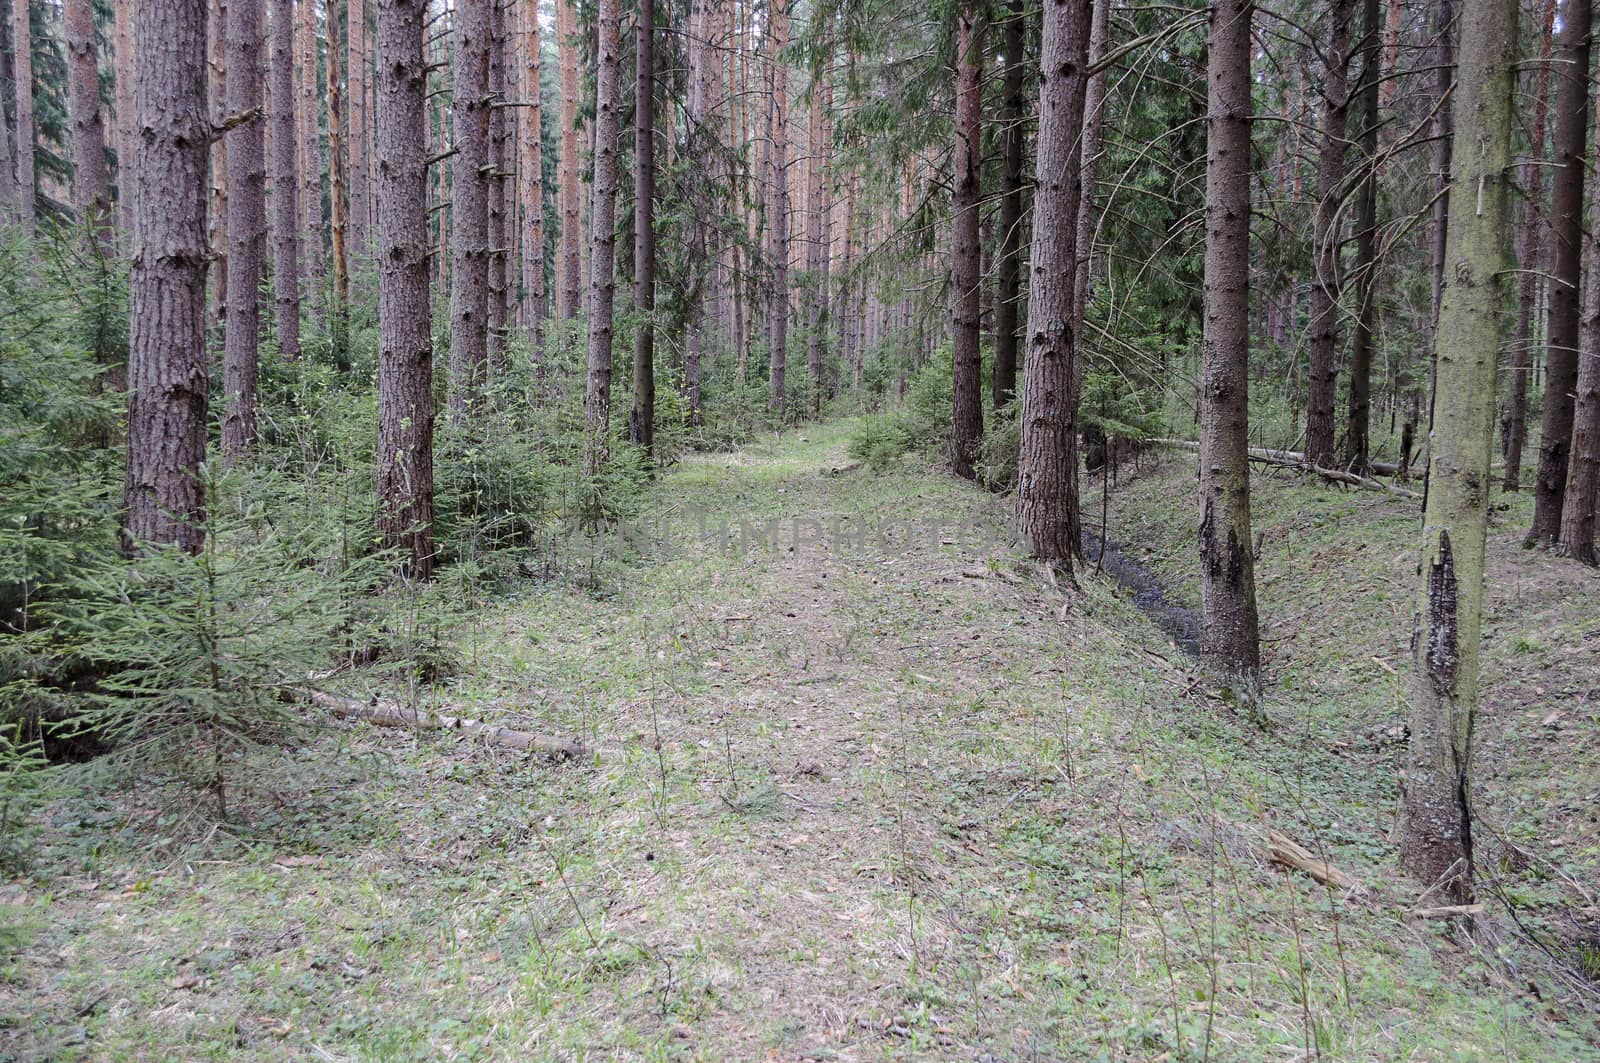 Footpath in coniferous spring forest by wander